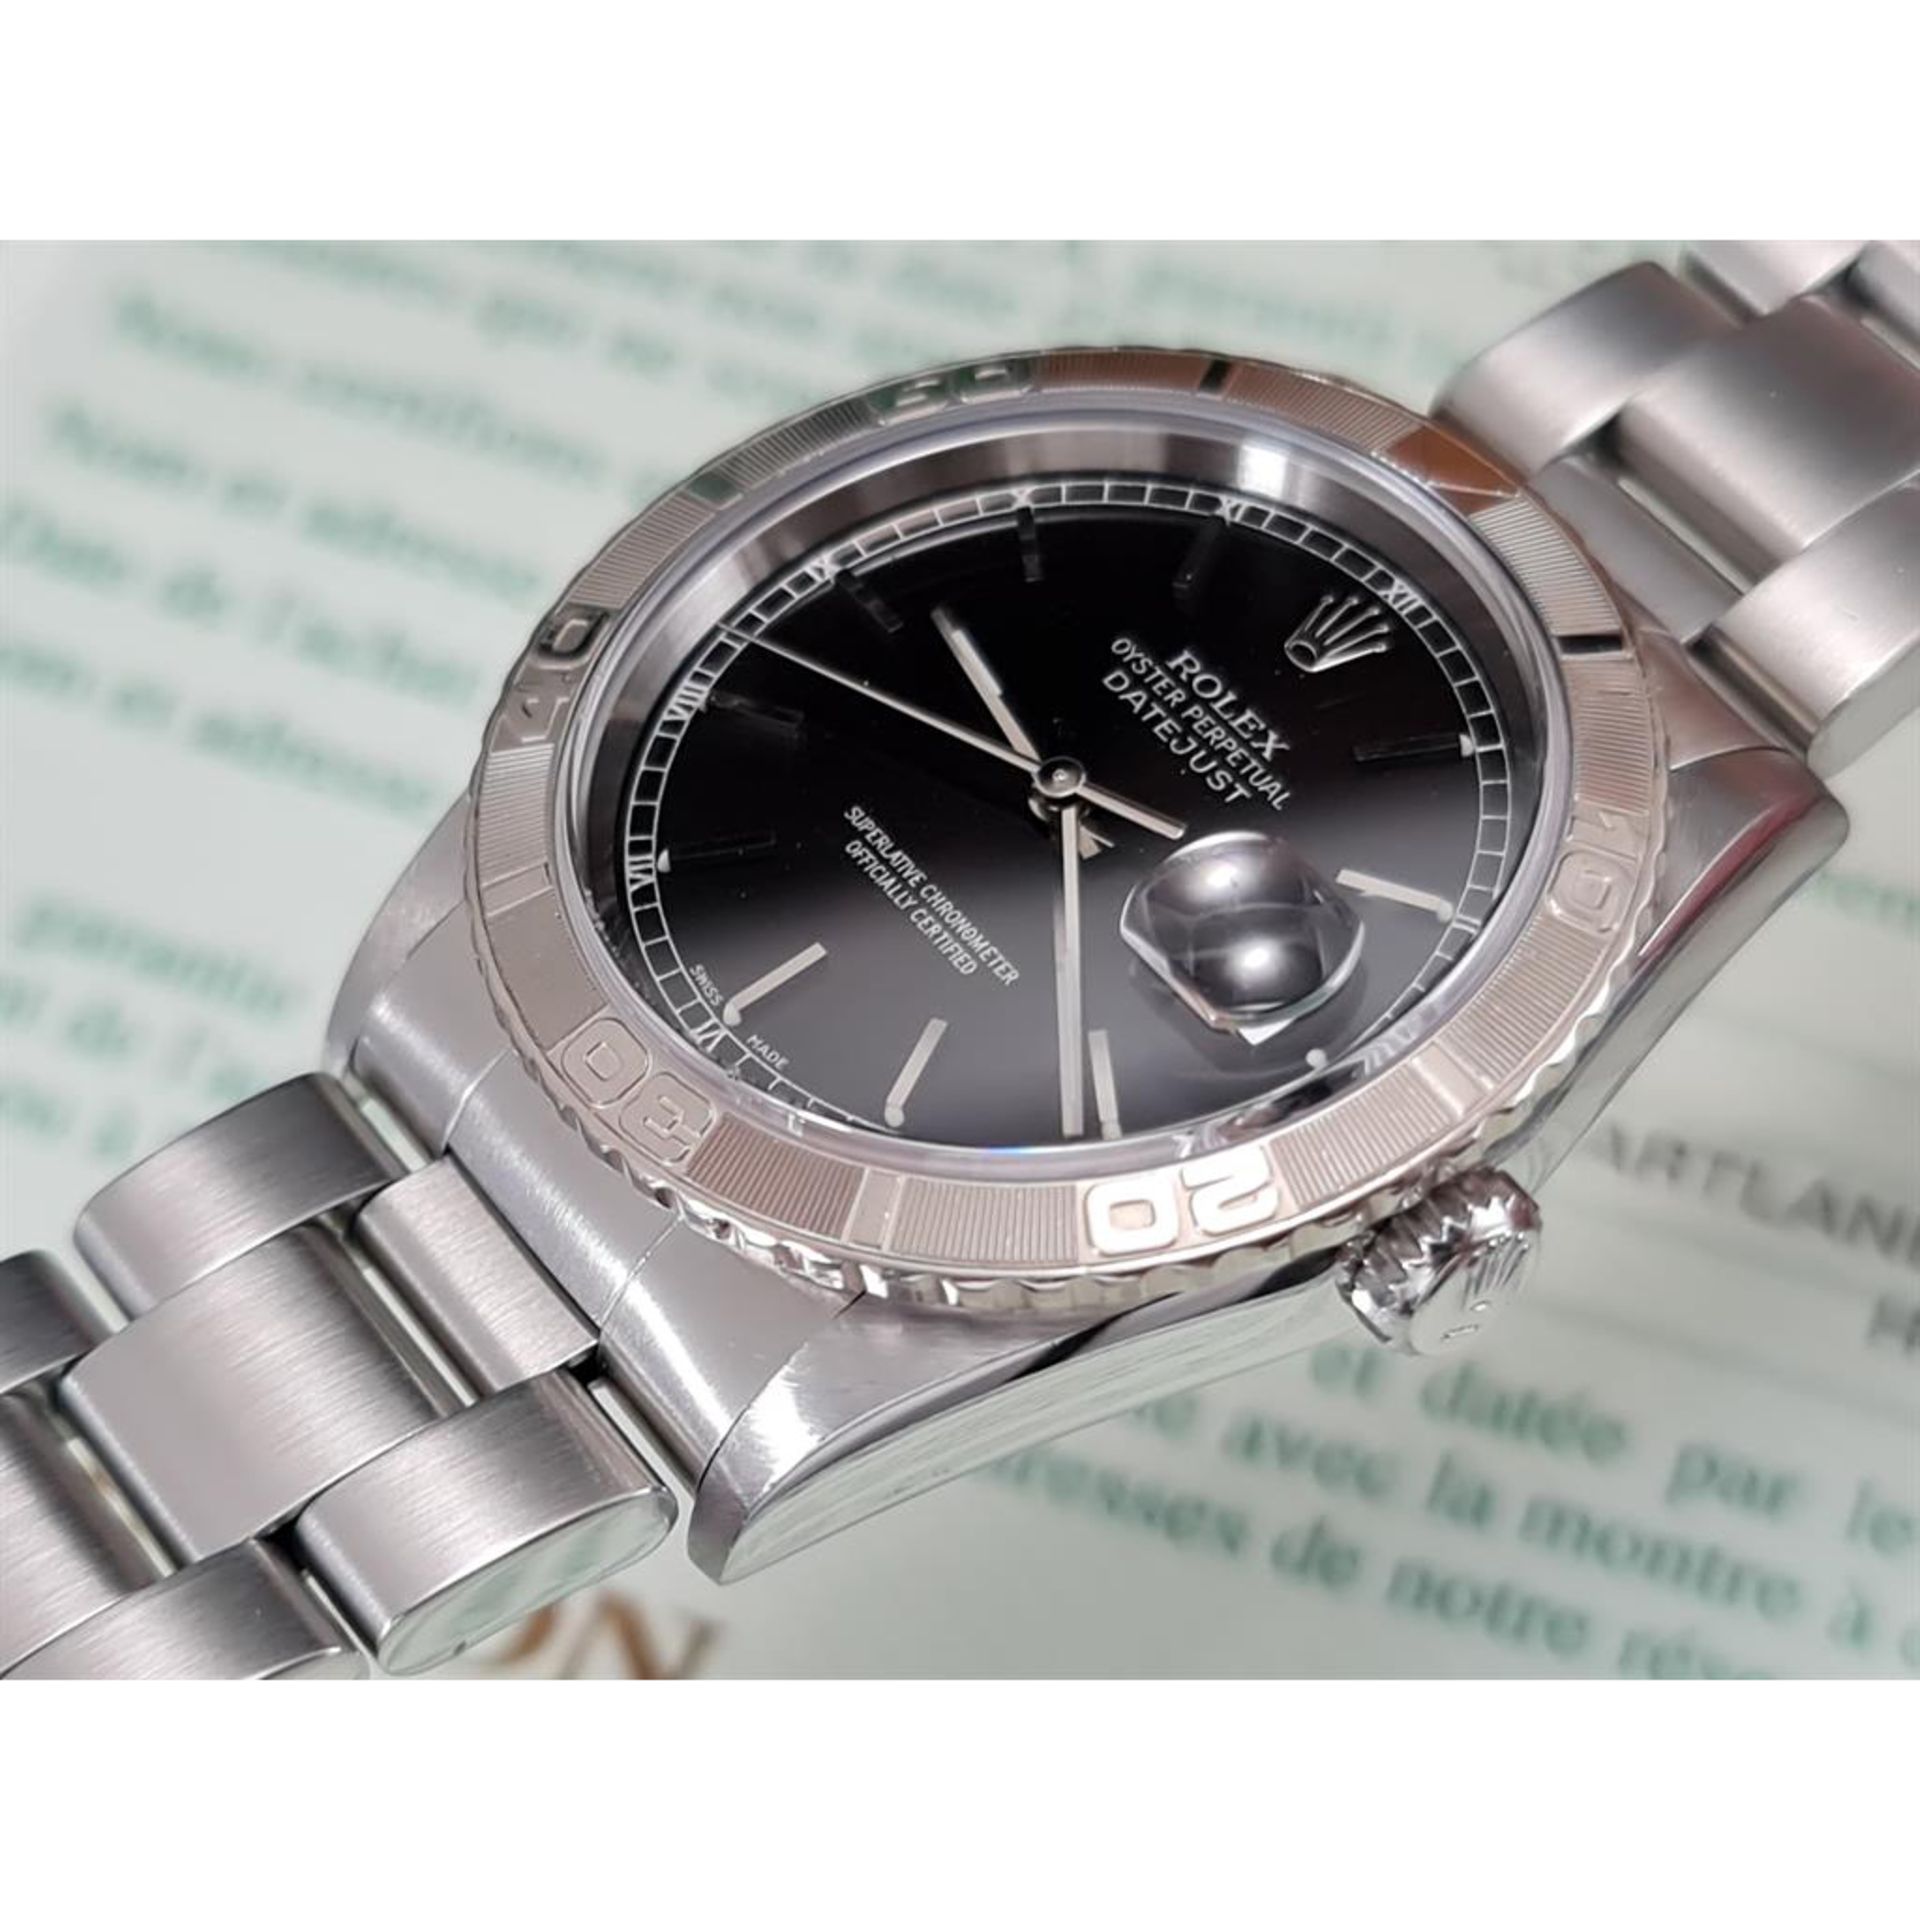 1999 Rolex Datejust Turn-O-Graph 16264 Steel White Gold - Black Dial - Oyster - Image 5 of 11